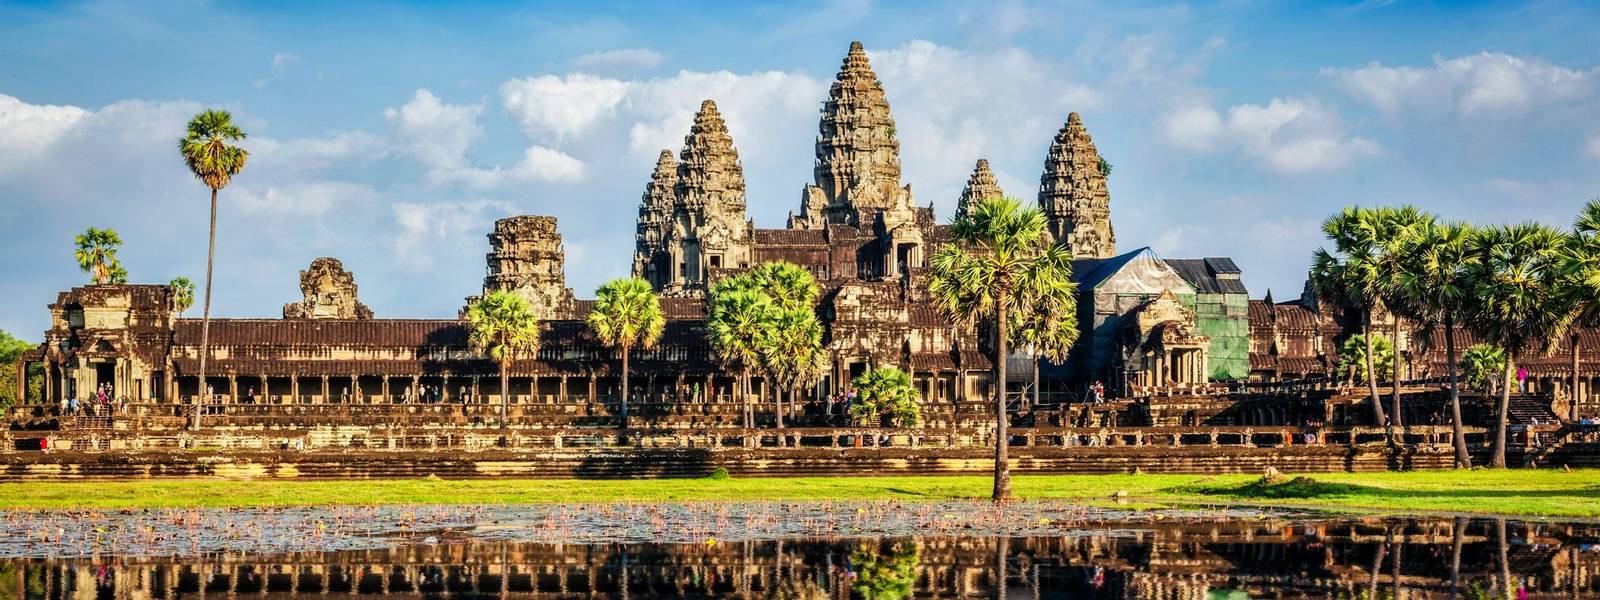 Angkor Wat temple - Cambodia iconic landmark with reflection in water